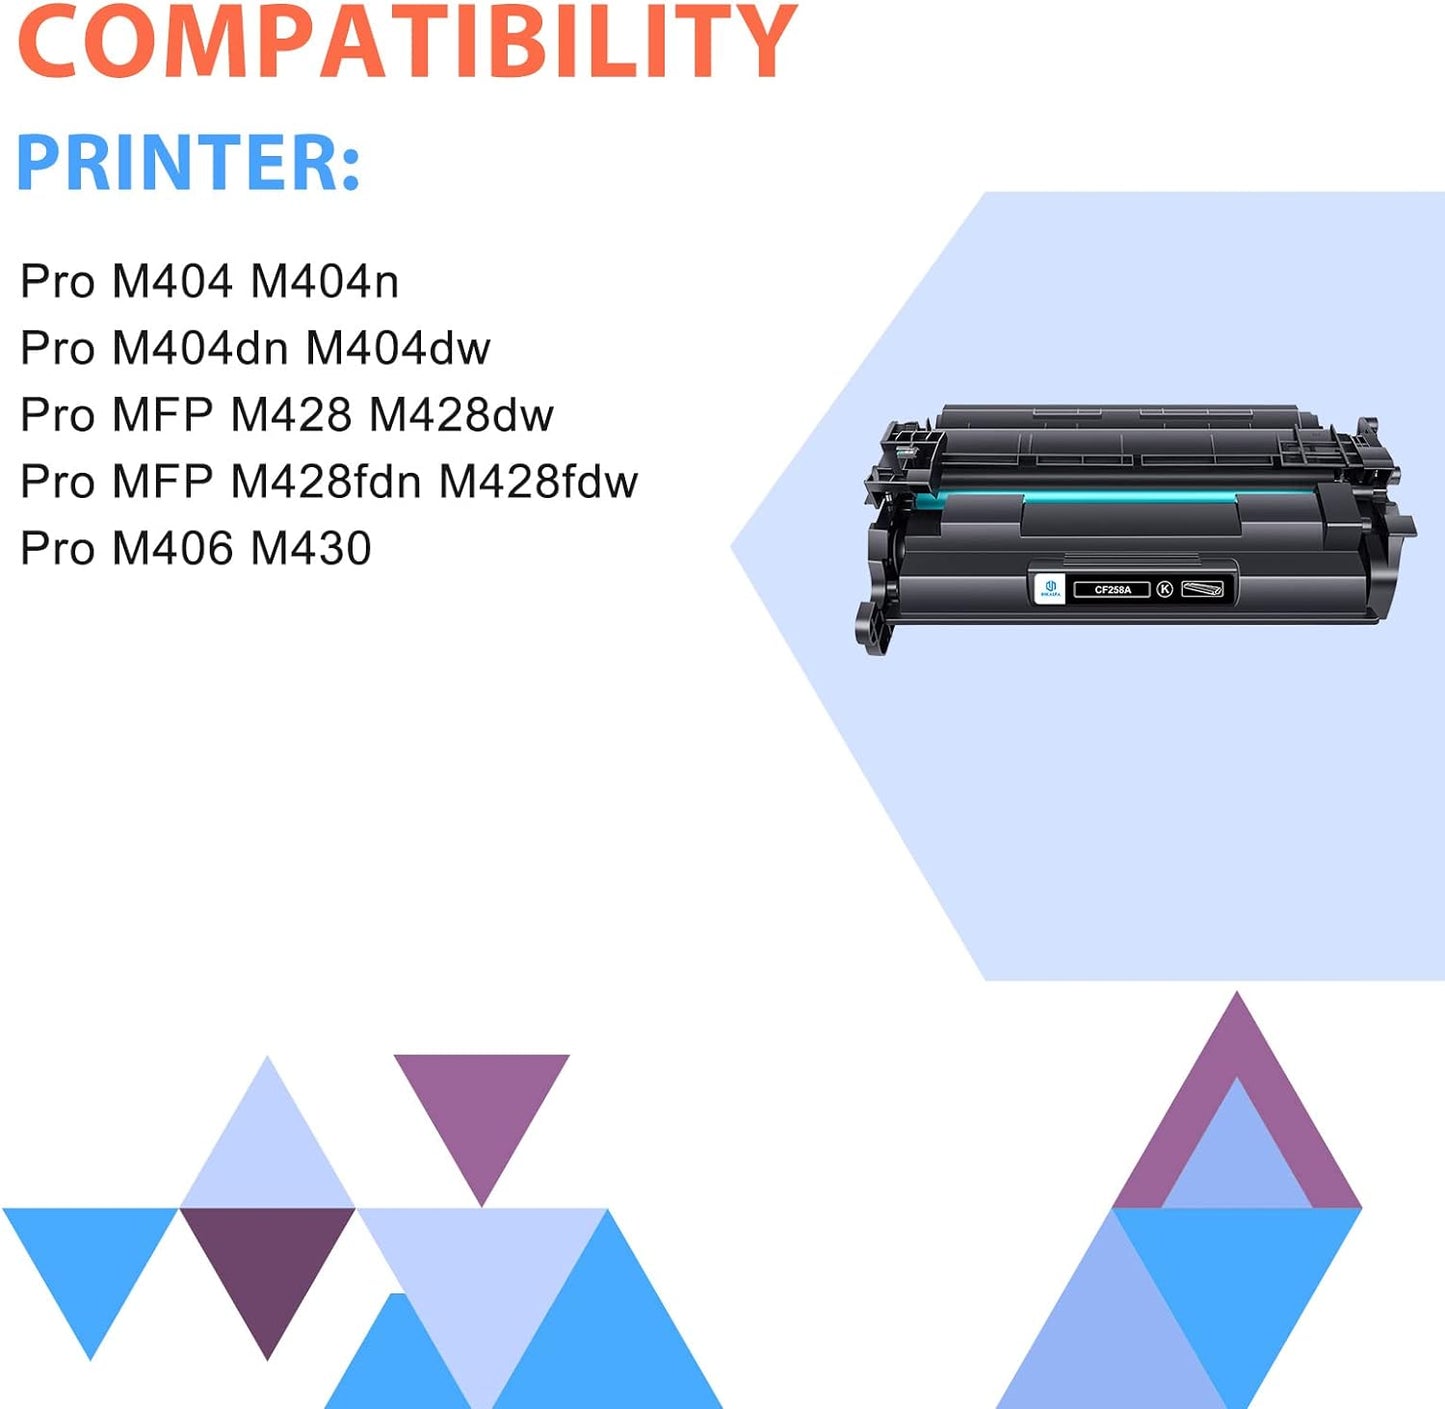 inkalfa 58A CF258A Toner Cartridge Black: 4 Pack (with Chip, High Yield) Replacement for HP CF258A 58A 58X CF258X MFP M428fdw M428fdn M428dw M404 M428 Pro M404n M404dn M404dw Printer